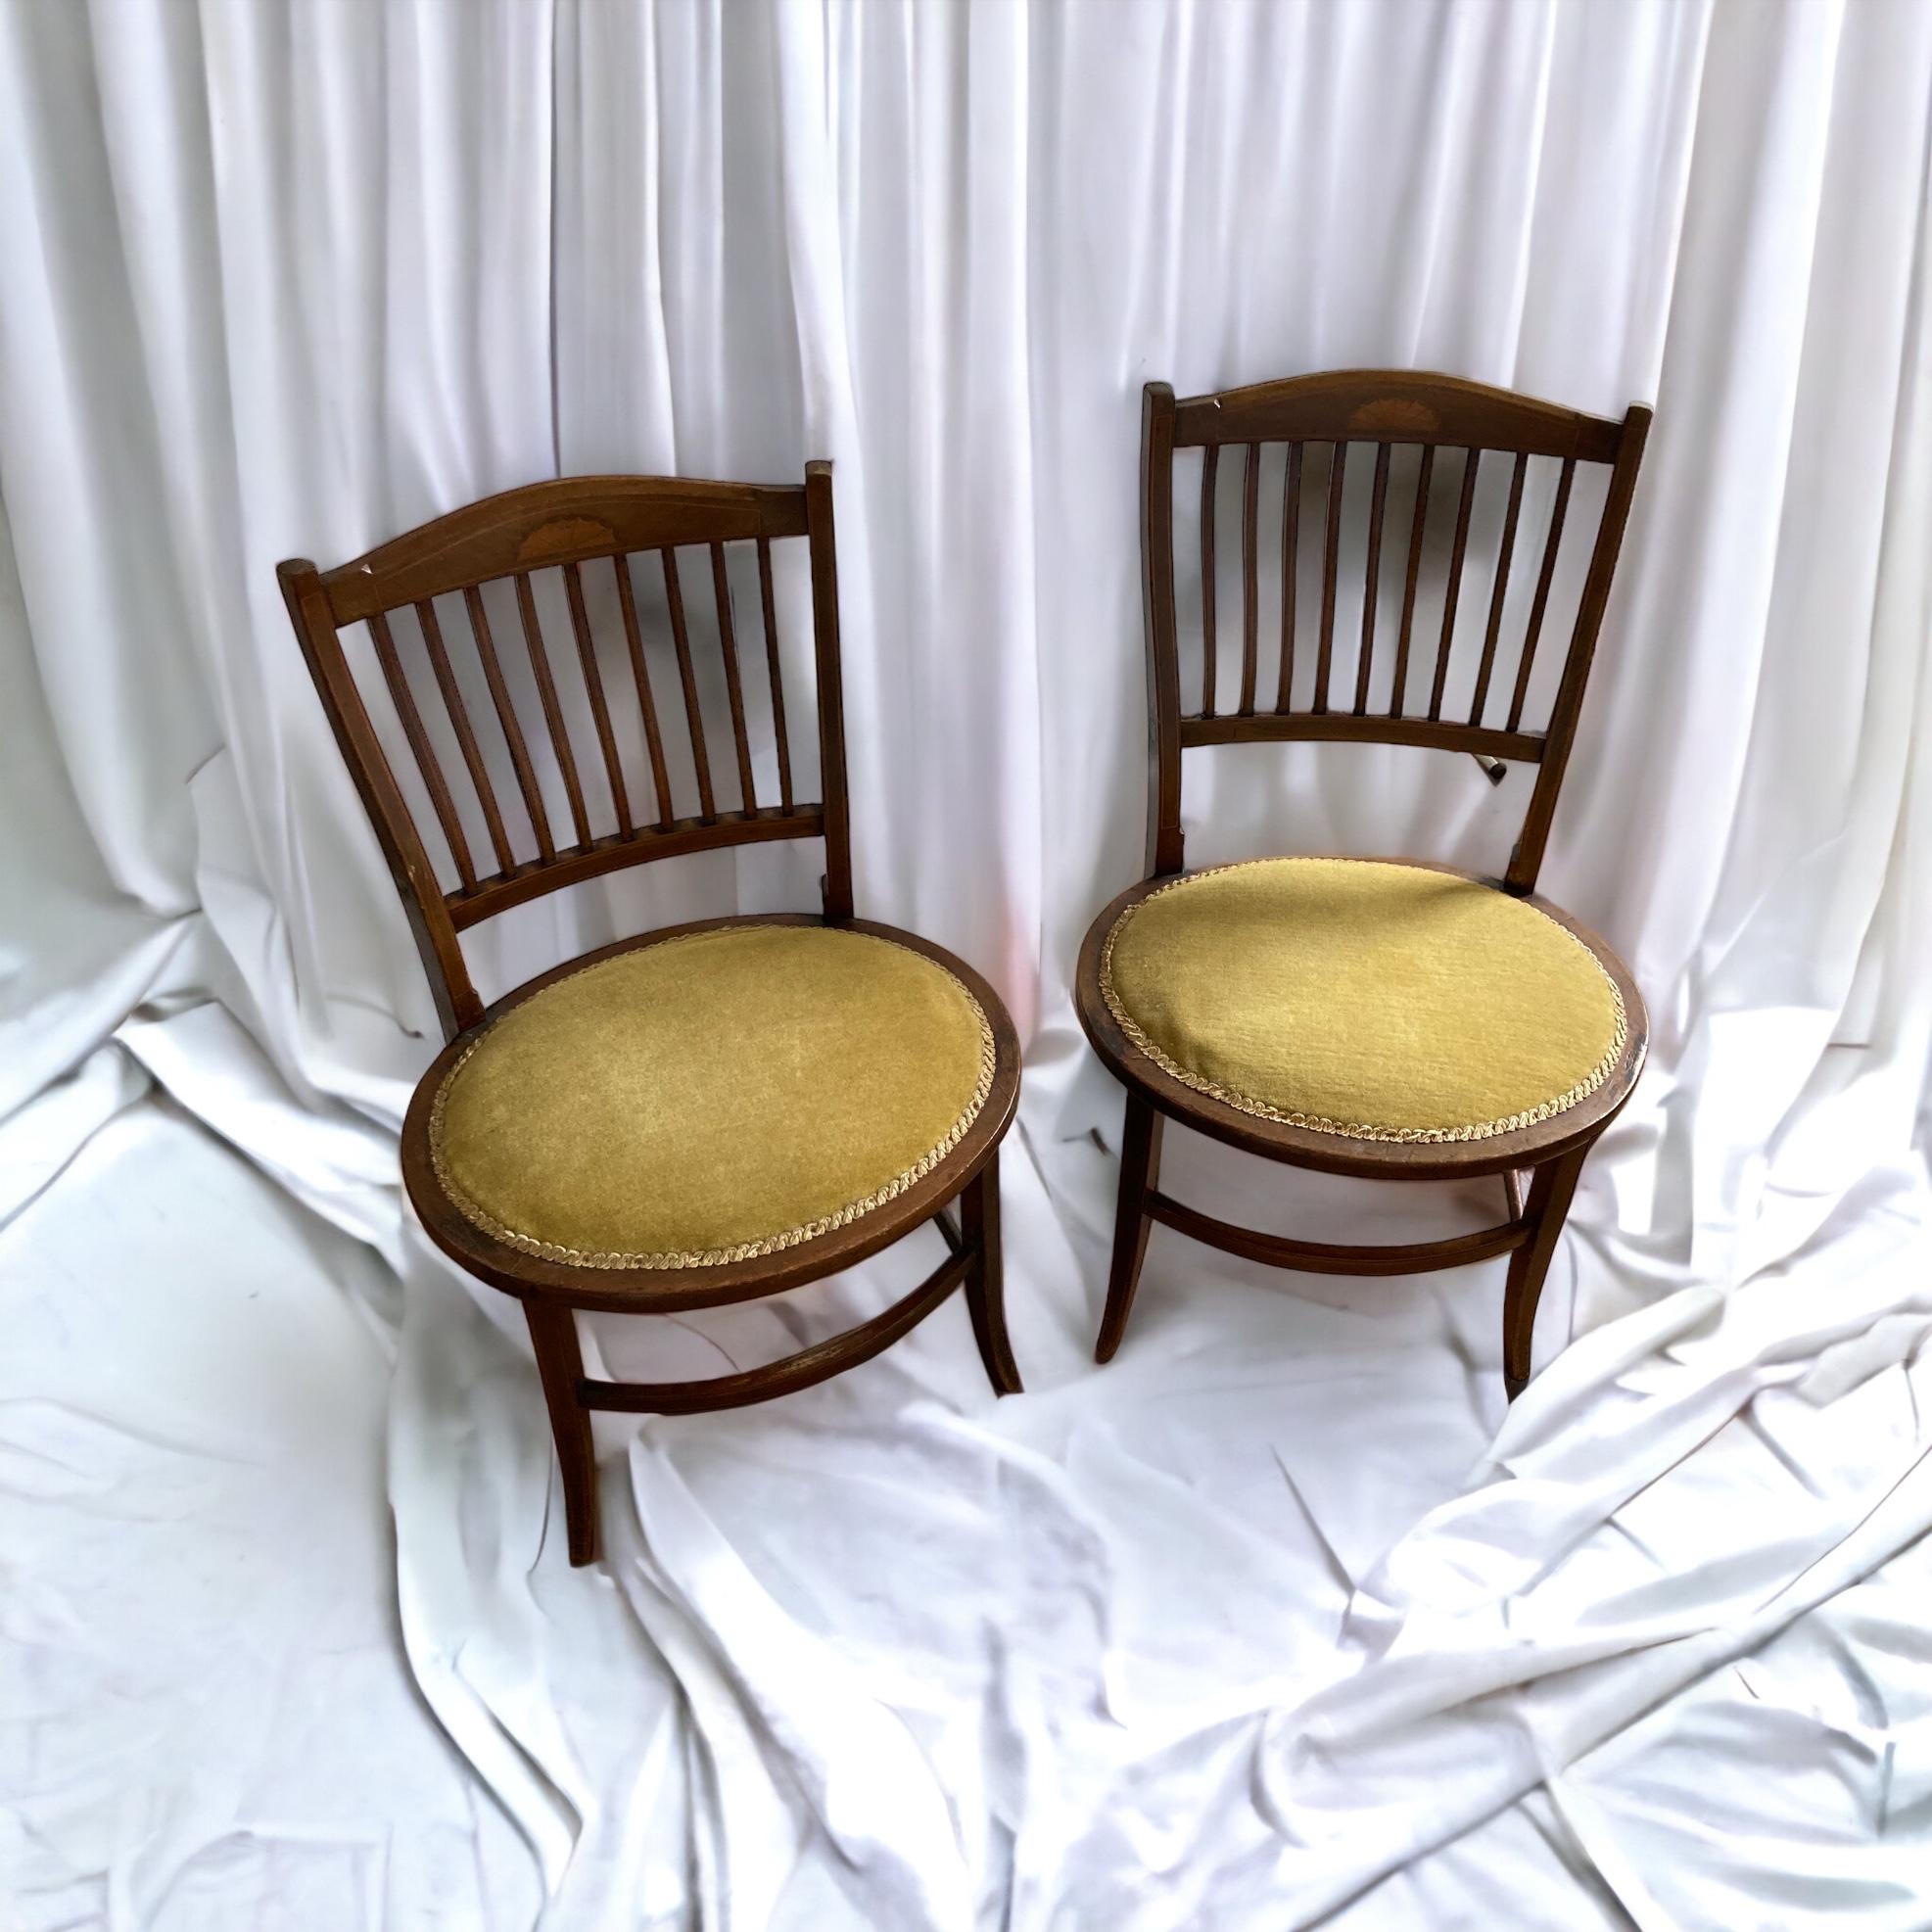 A pair of Edwardian Antique Mahogany Oval based hall, side chairs. Original Olive green upholstery.

Good condition

H: 76 cm

W: 52 cm

Seat H: 37 cm

D: 44 cm